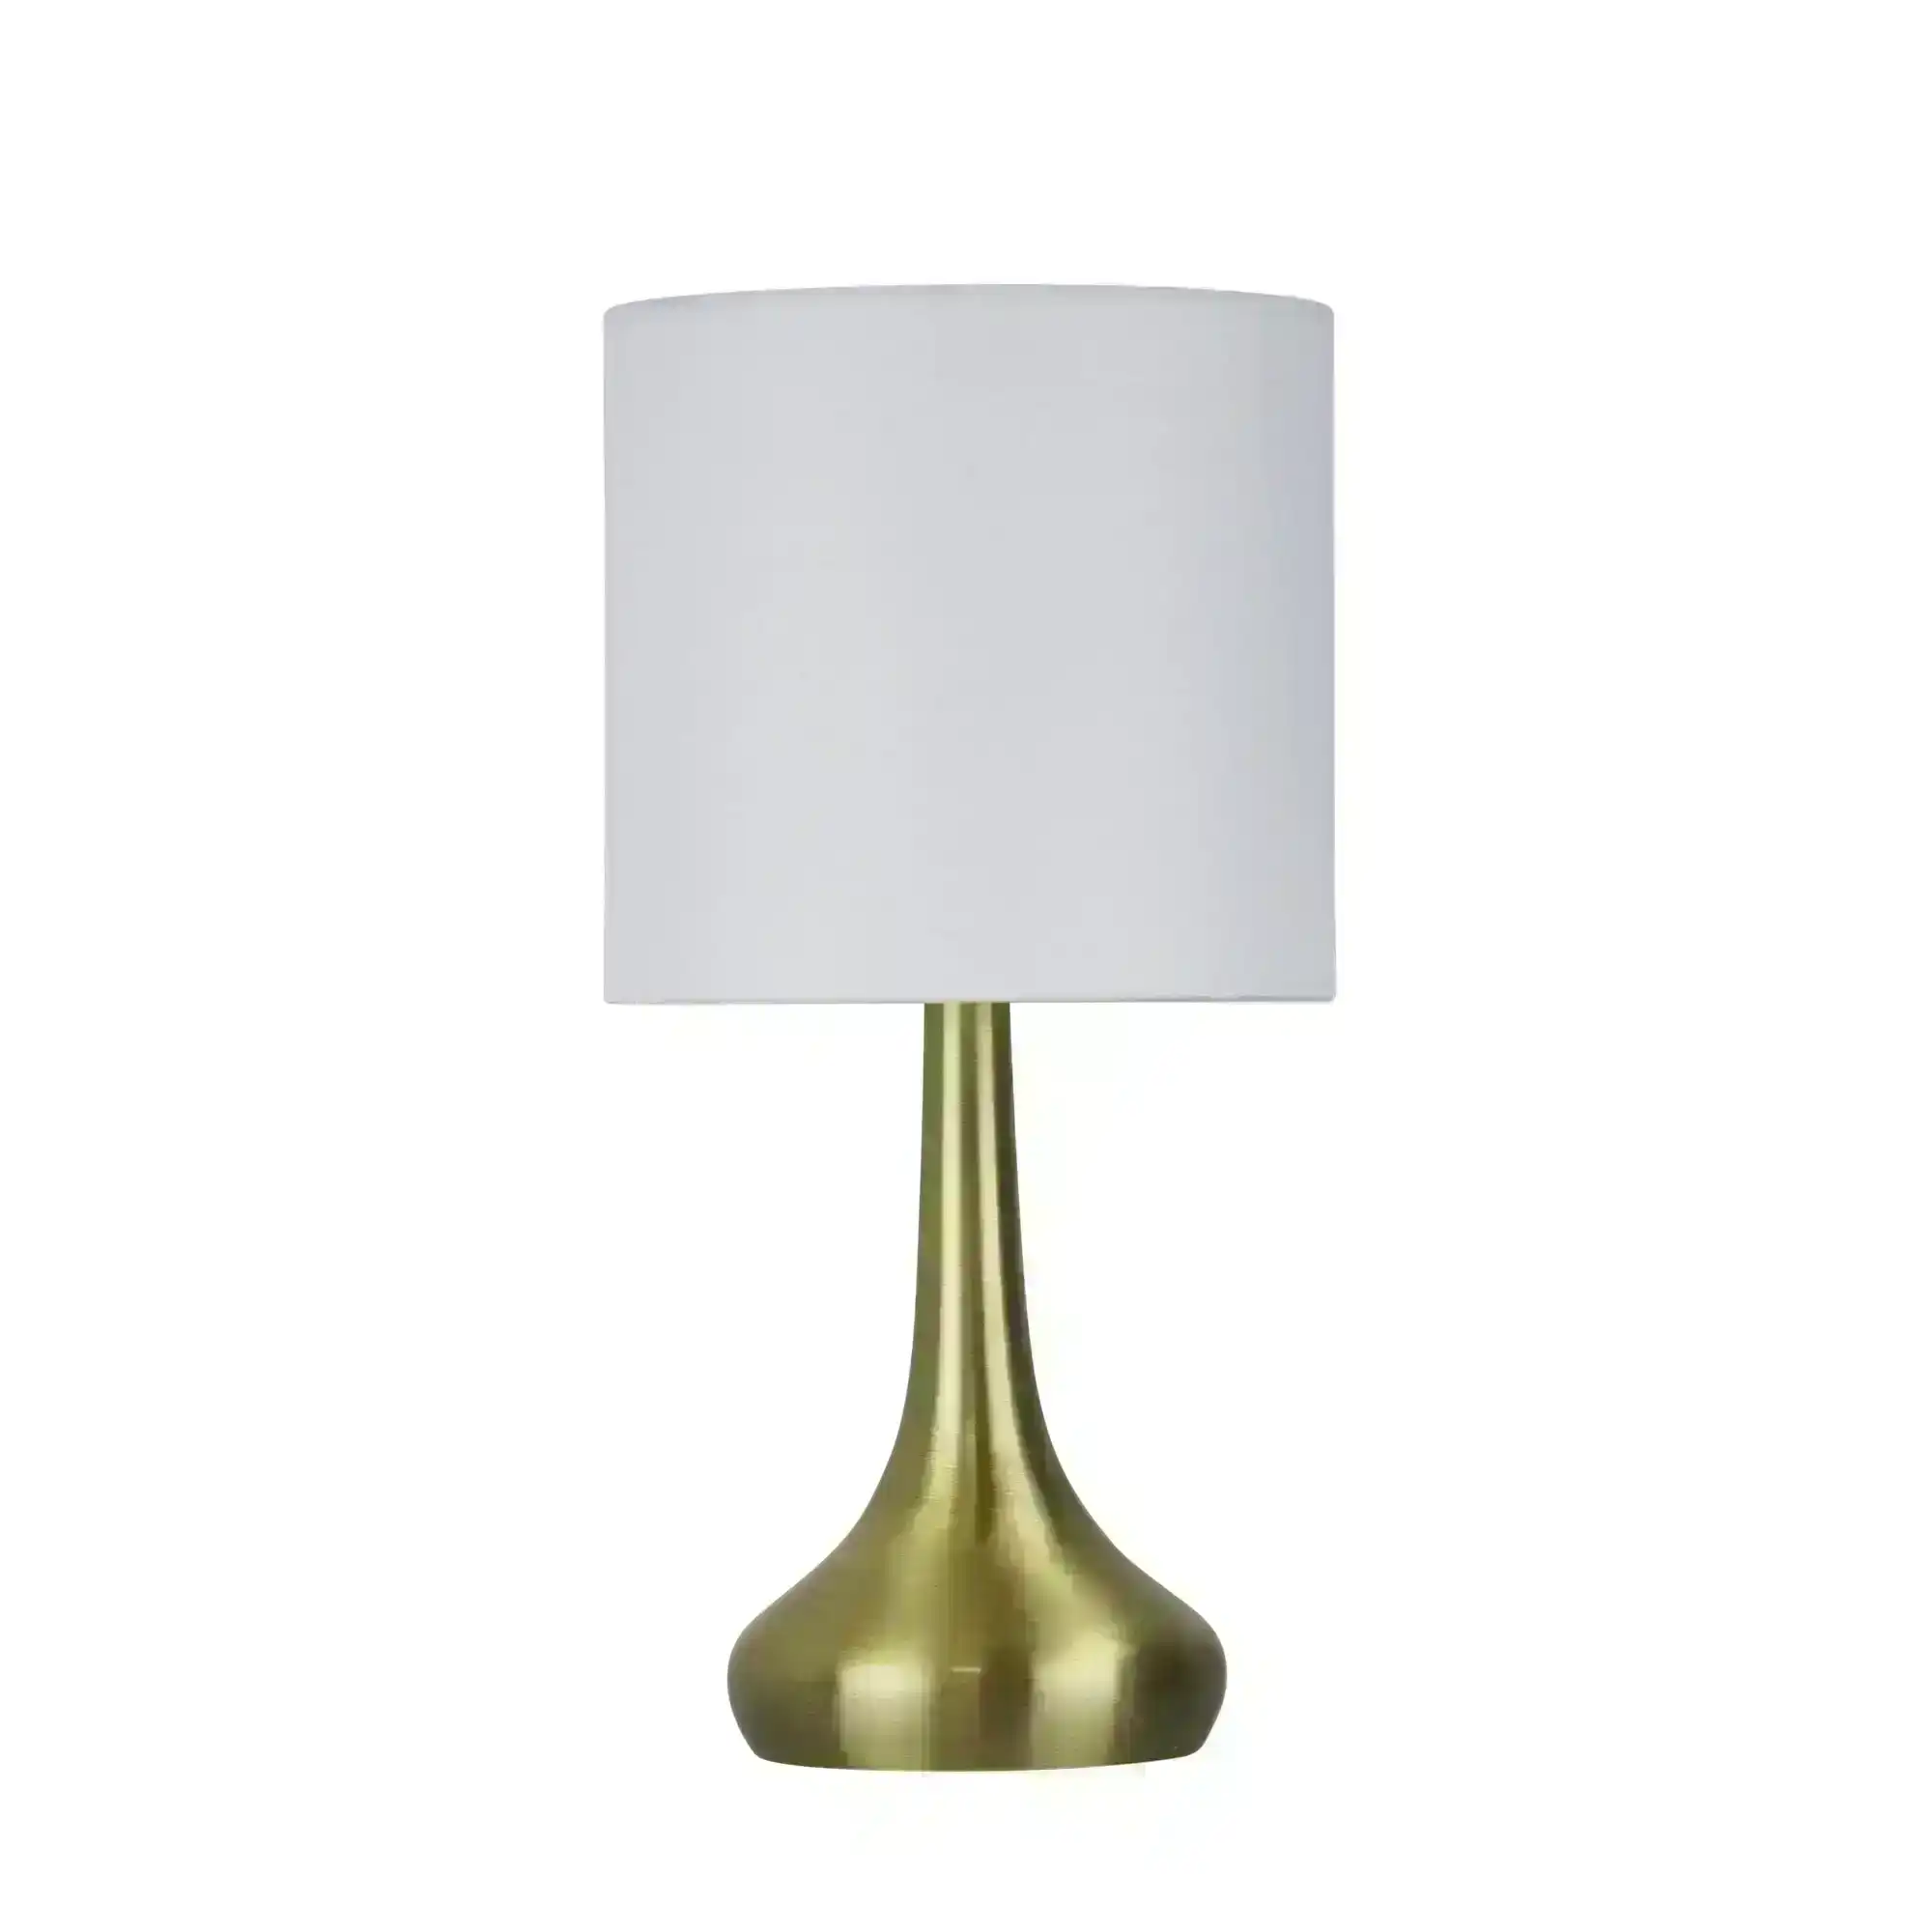 LOLA ON / OFF Touch Lamp in Antique Brass Finish